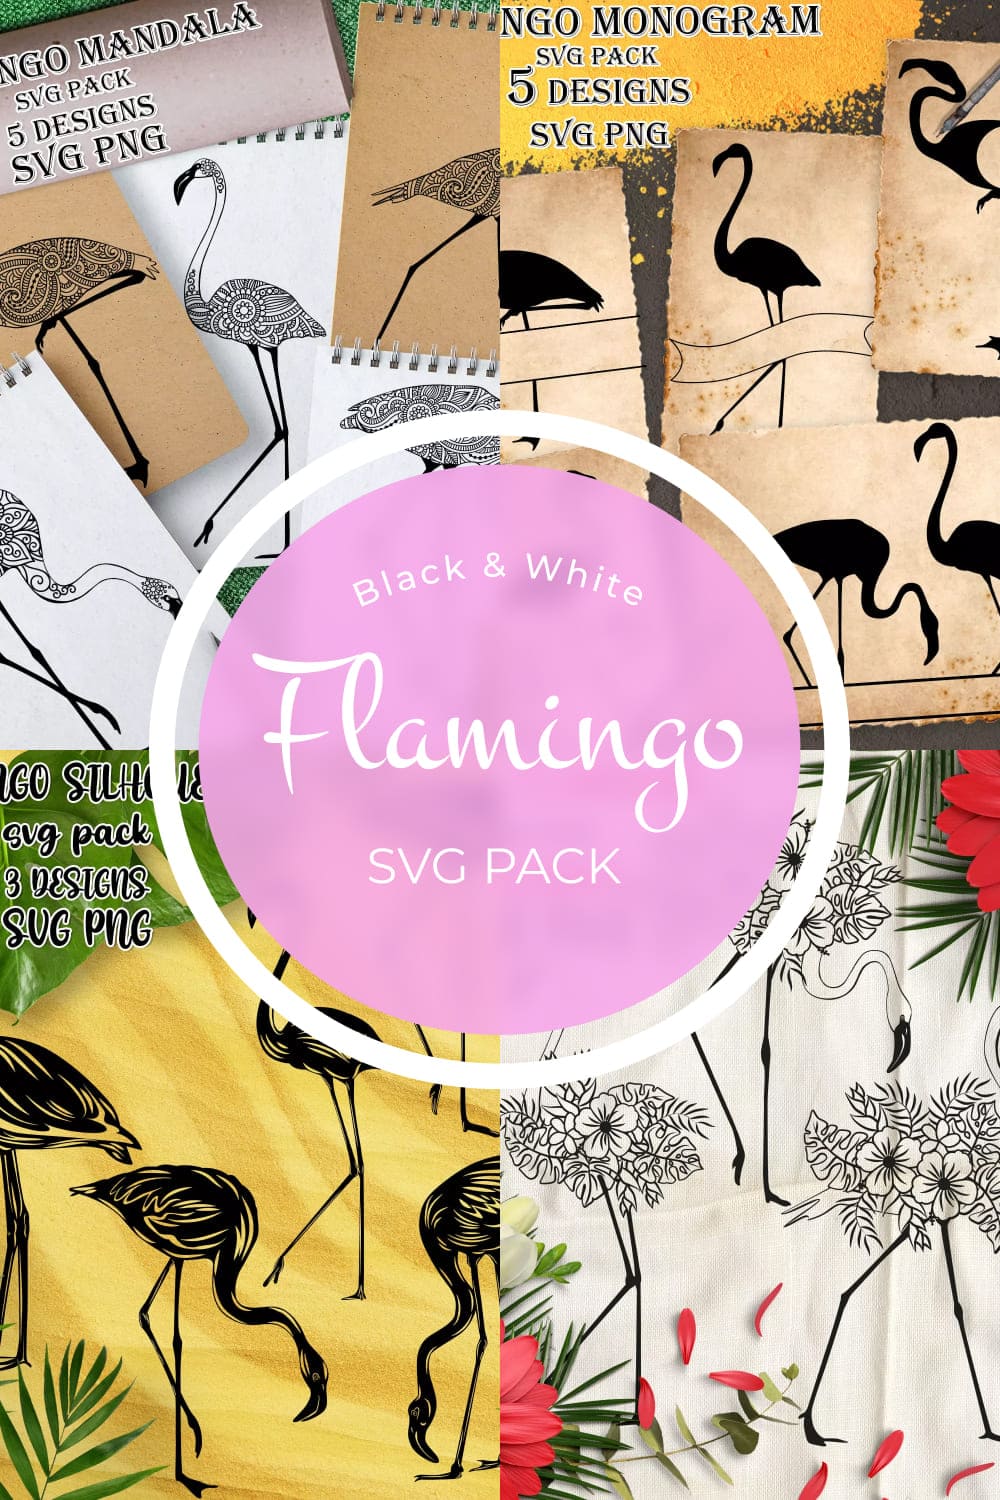 Flamingo svg pack with flamingos and flowers.